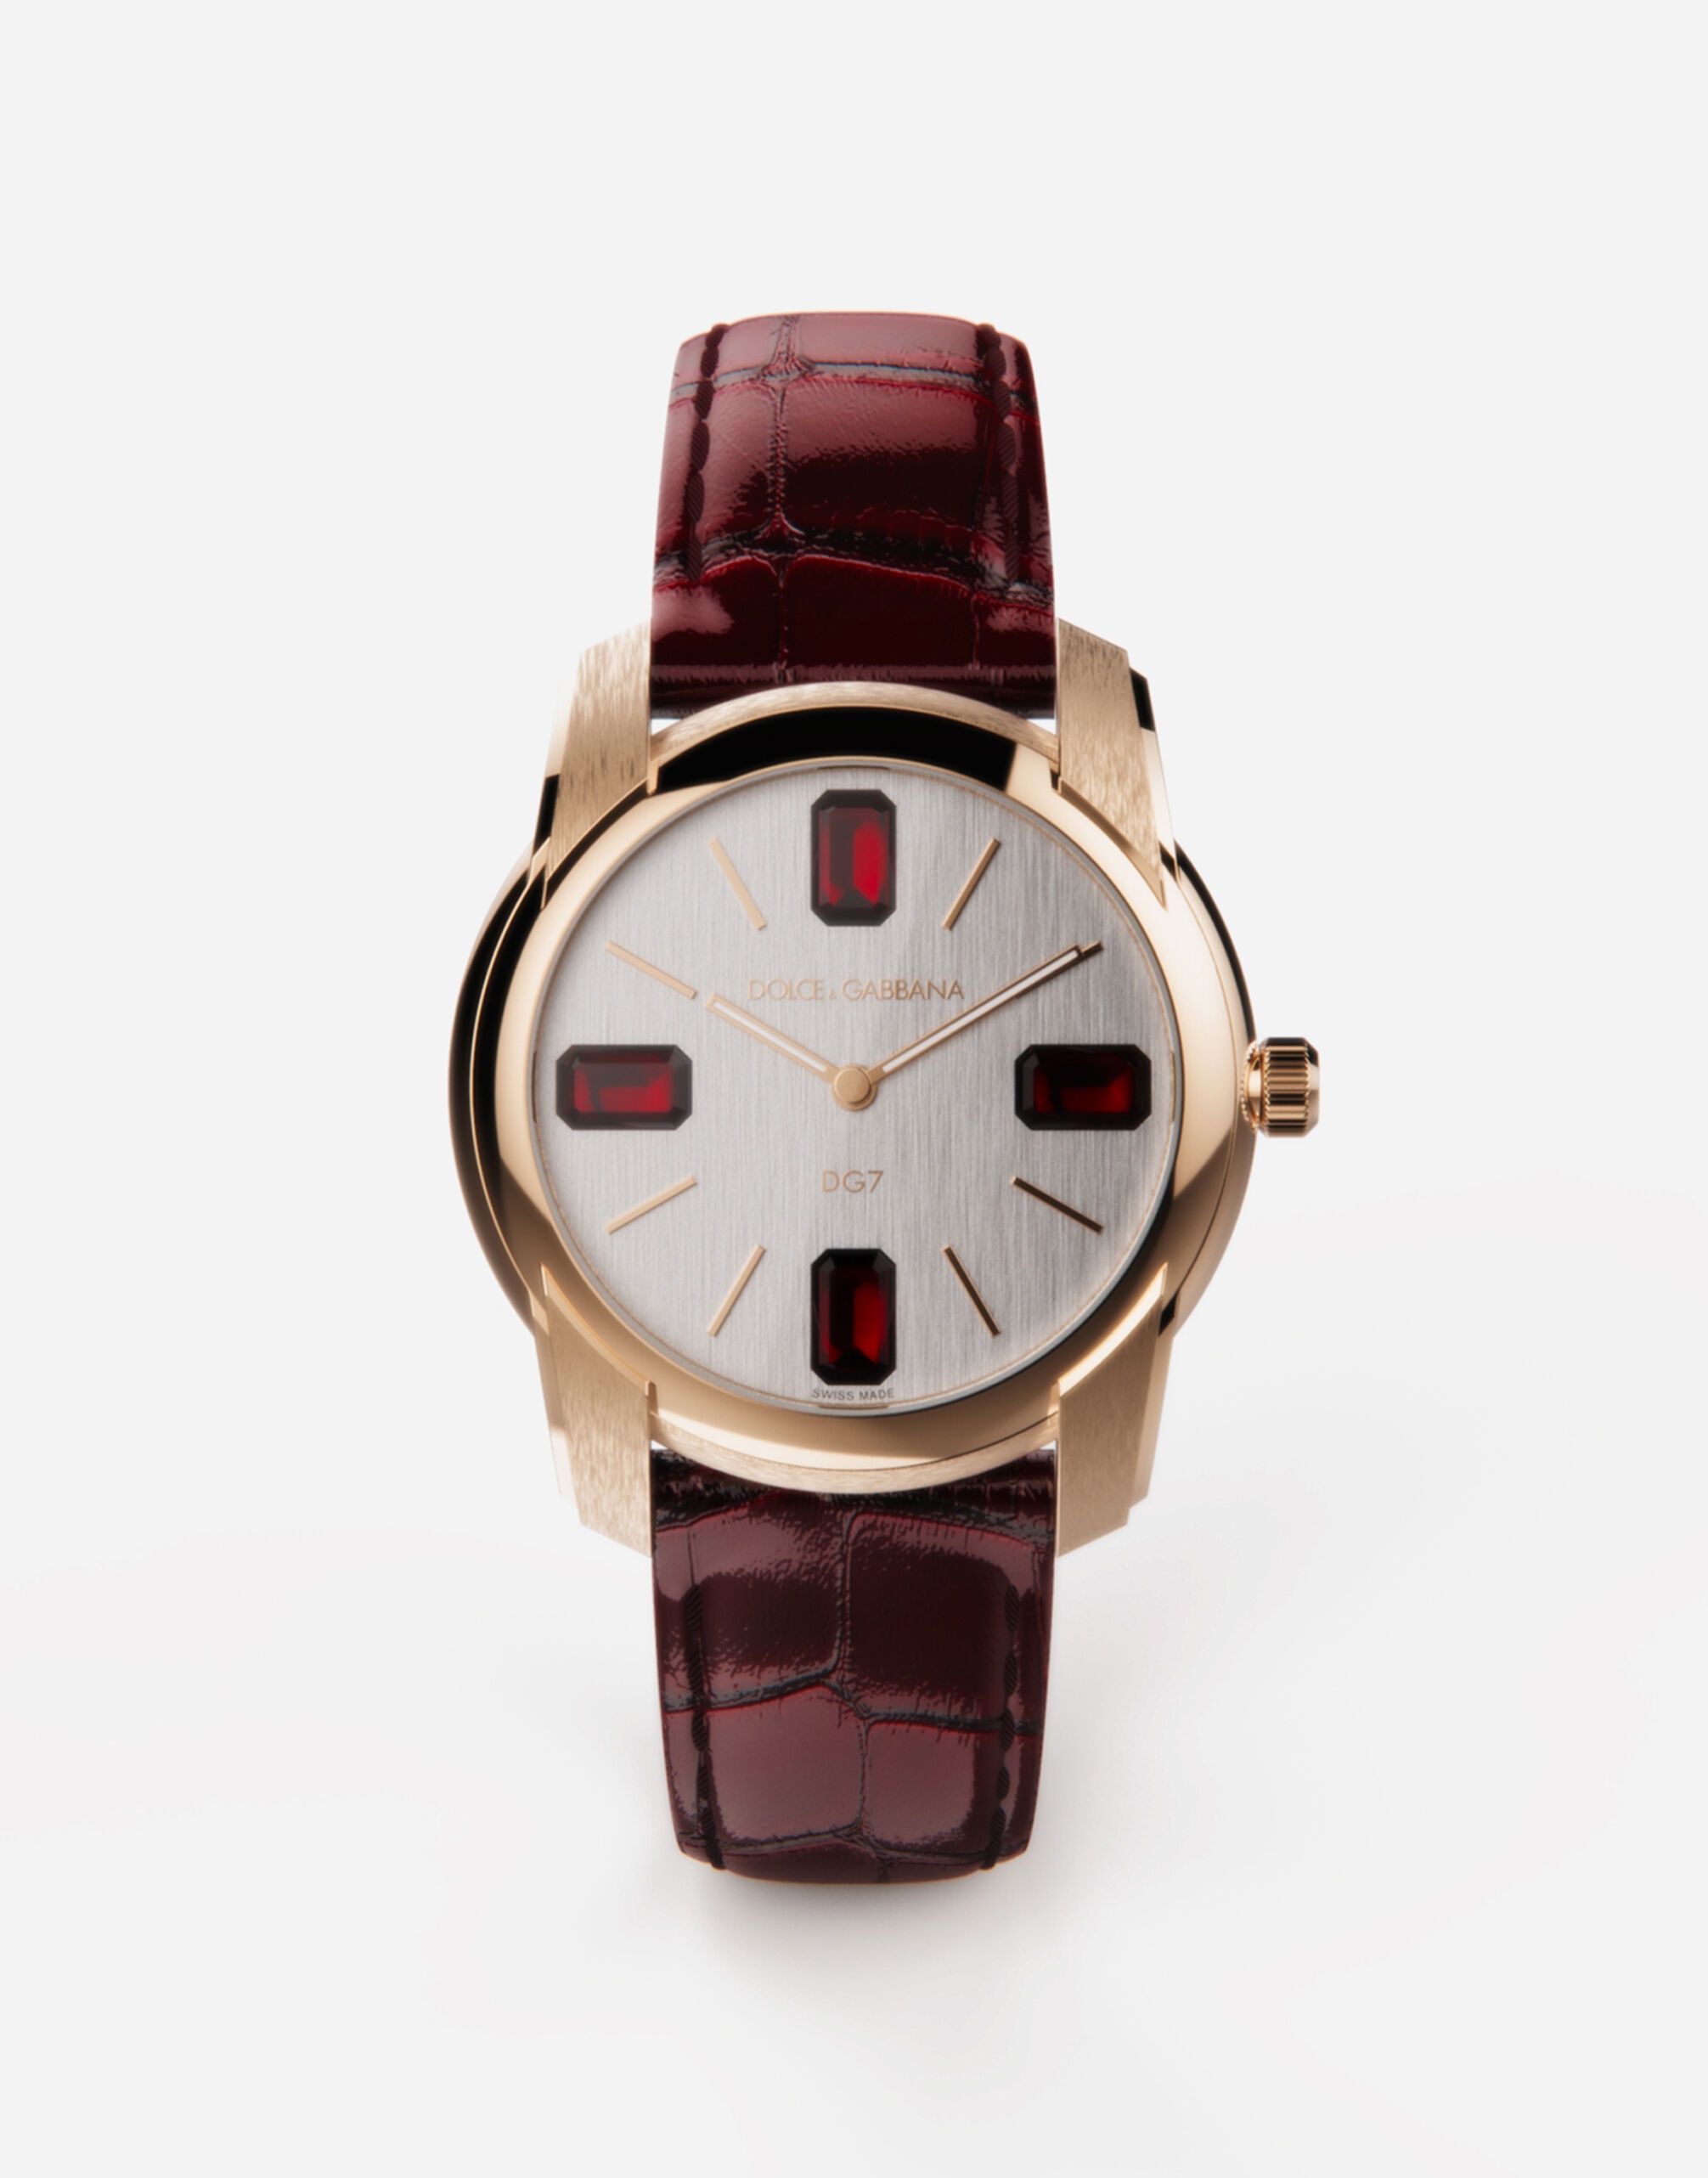 Gold watch with rubies - 1